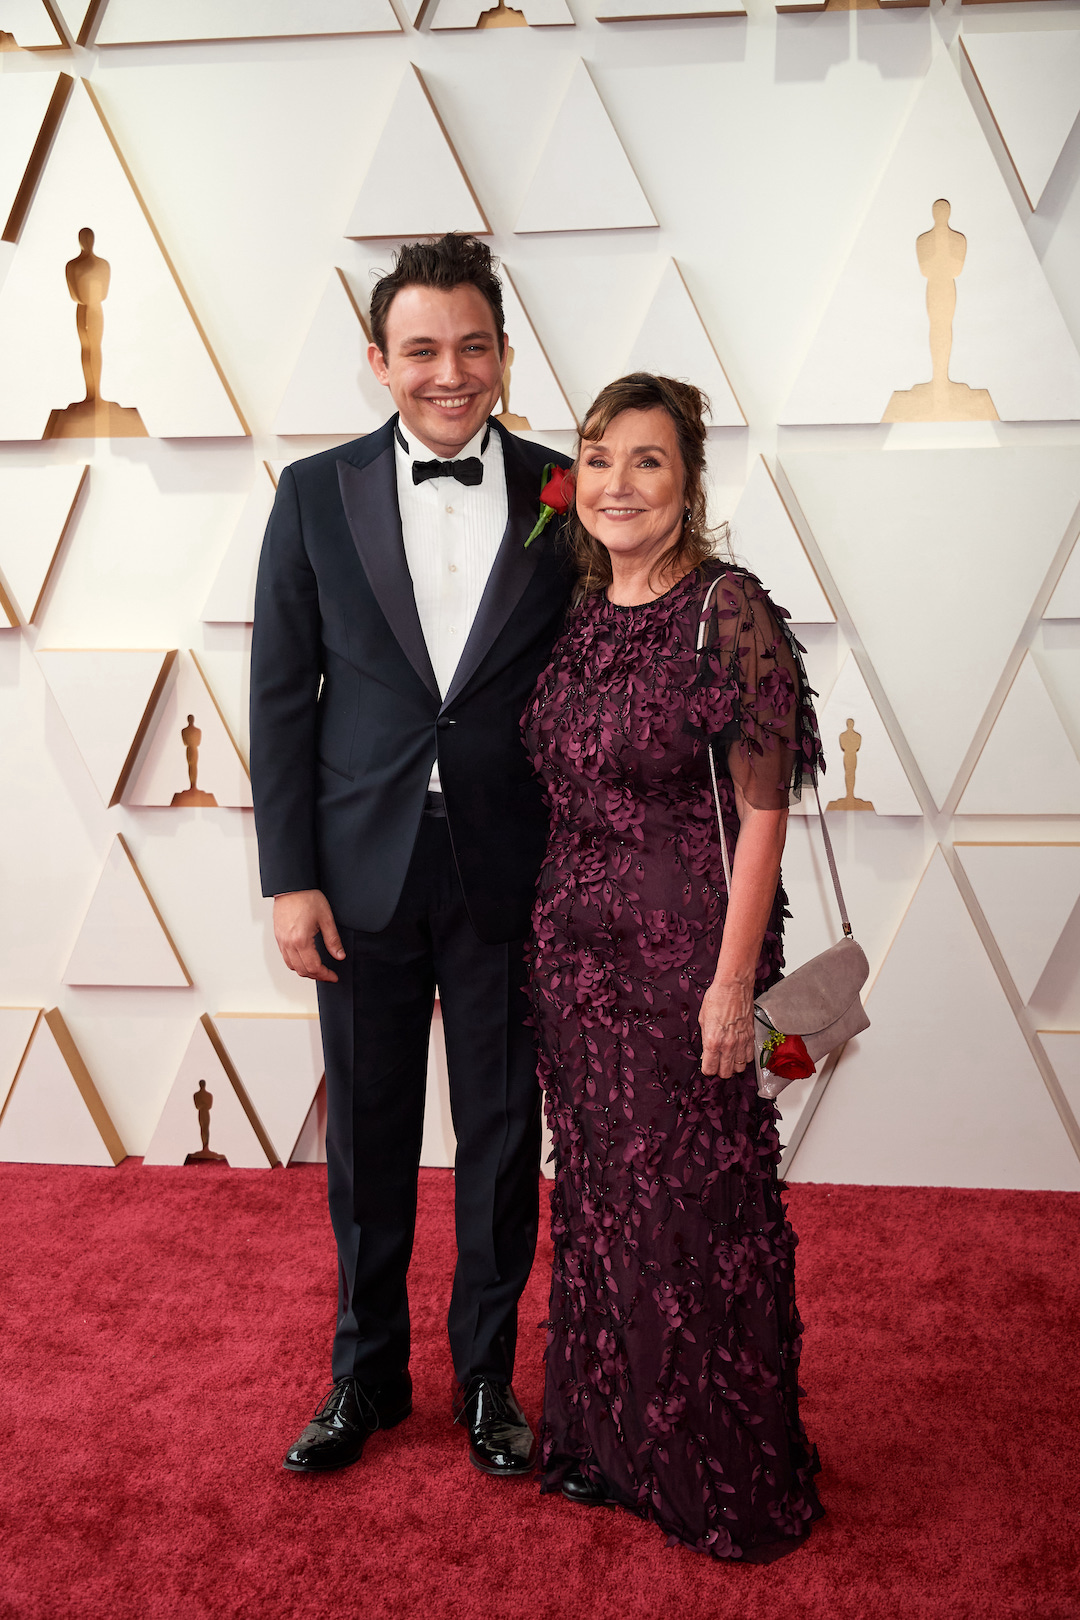 94th Oscars, Academy Awards 4Chion Lifestyle Ben Proudfoot